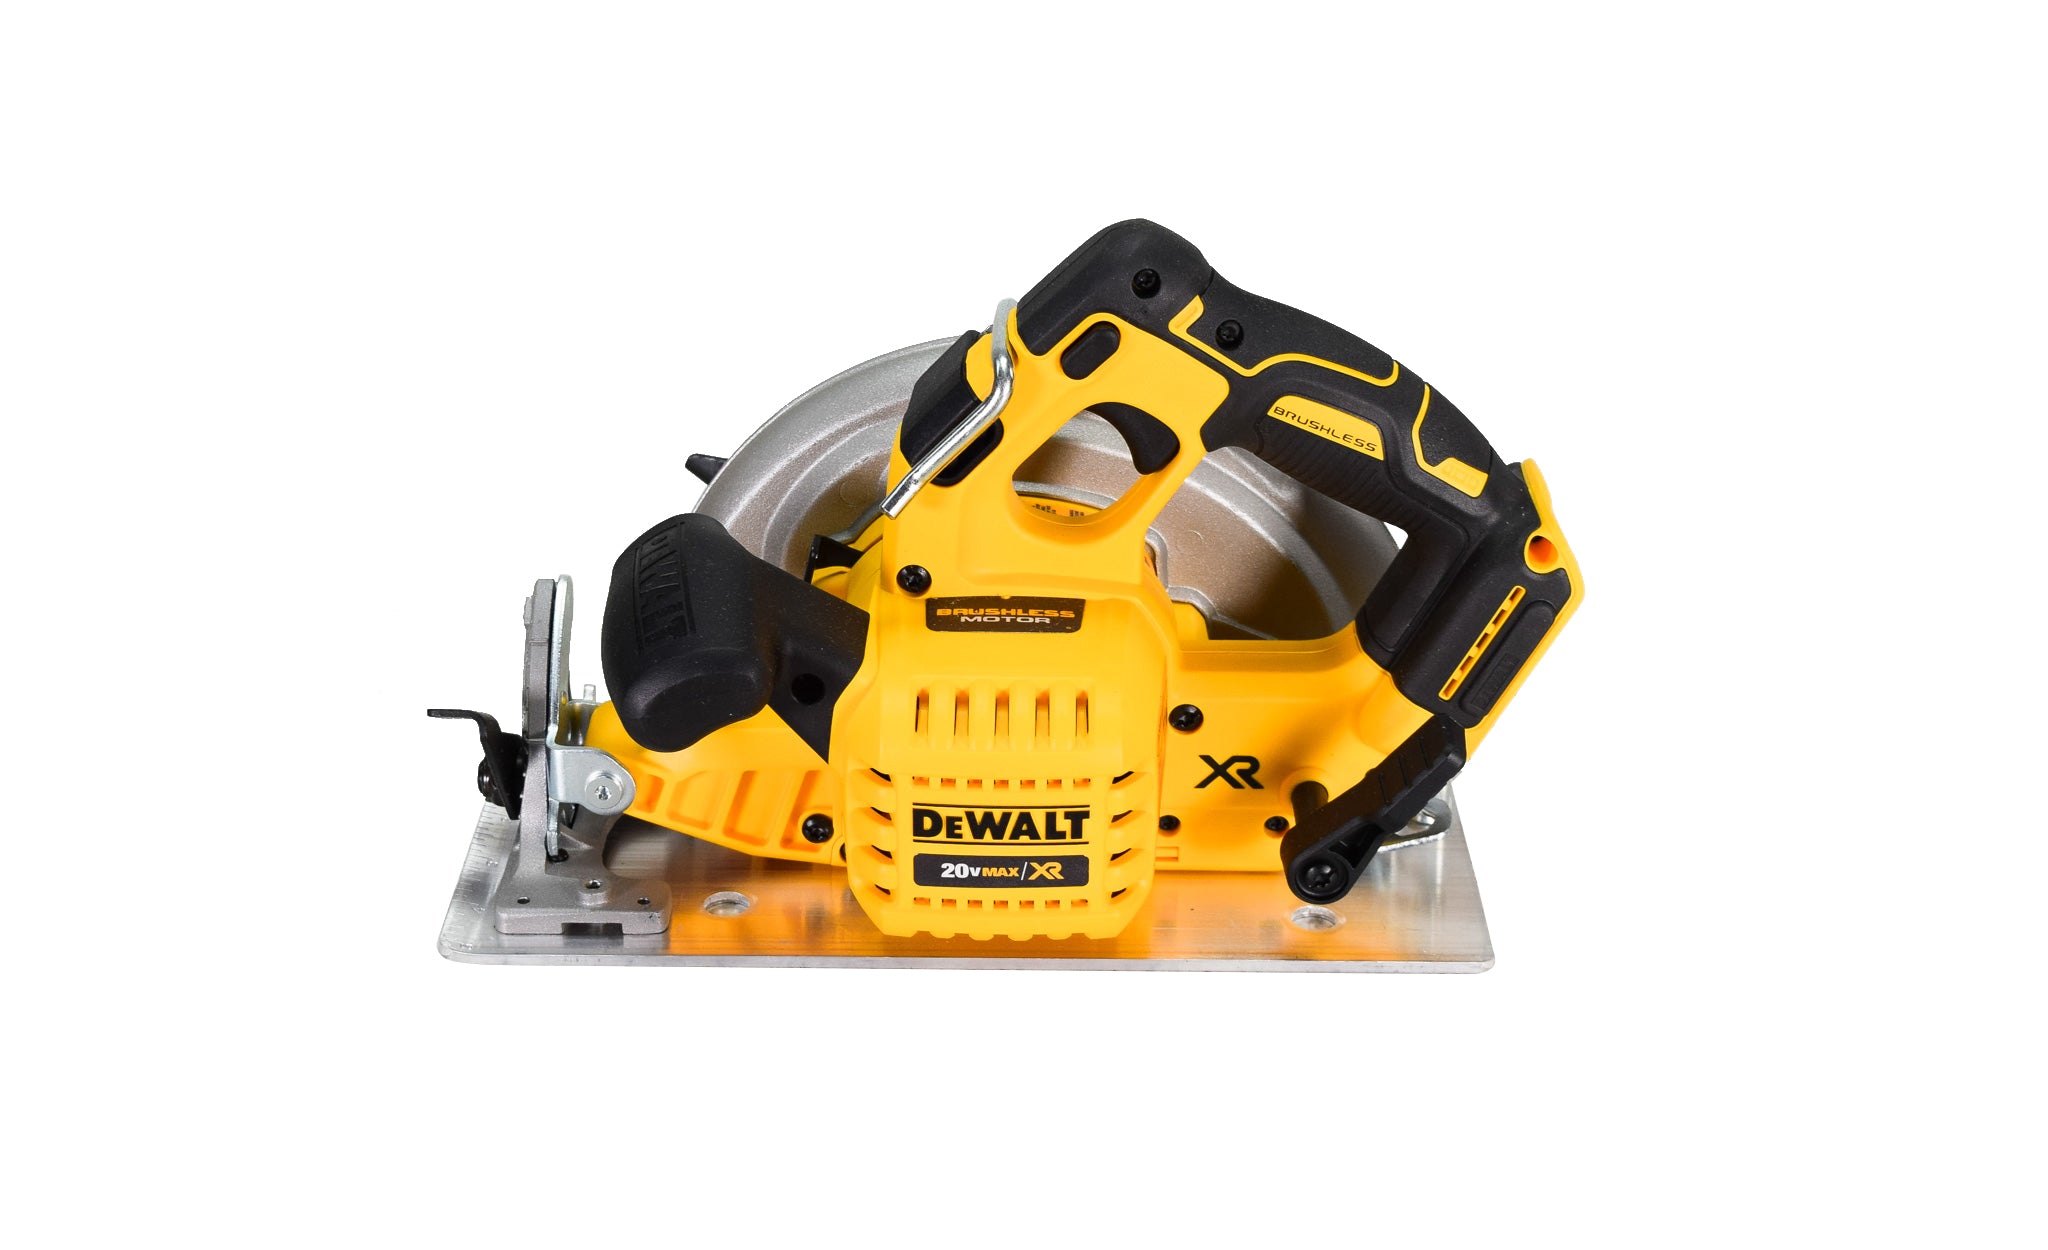 DeWalt DCS570H1 20V Cordless Brushless 7 1/4" Circular Saw Kit with 5.0Ah Battery and Charger